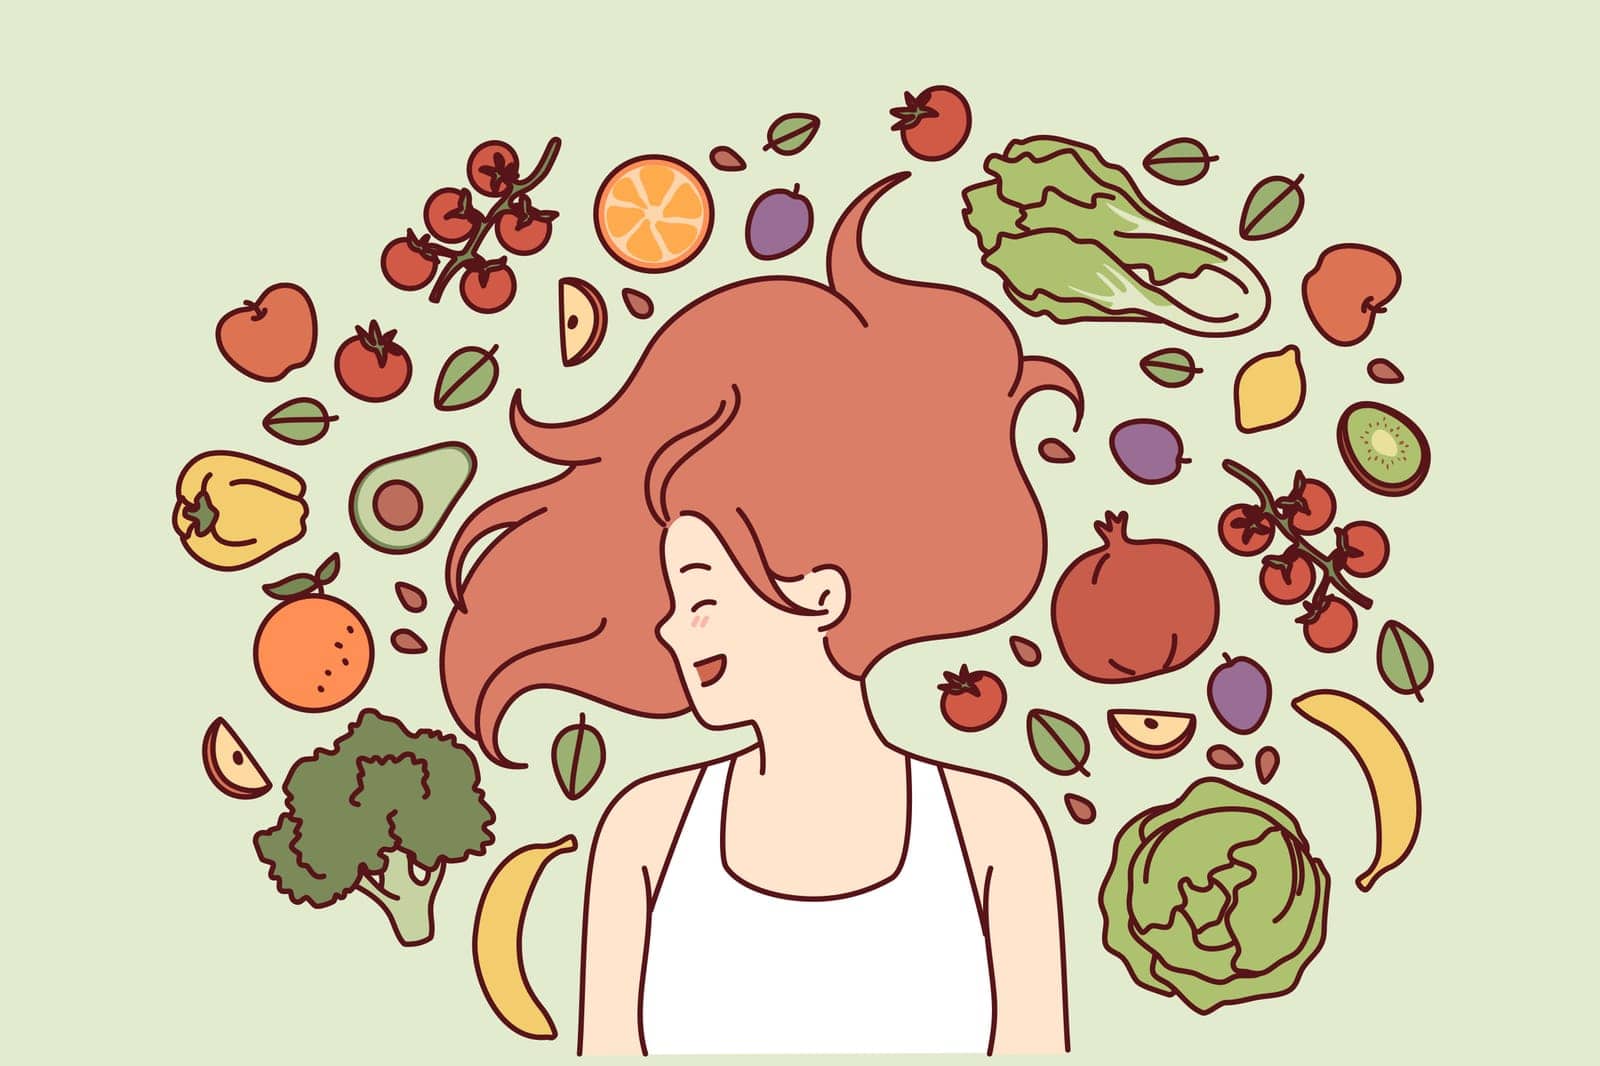 Vegetarian woman lies among fresh fruits and vegetables, rejoicing at opportunity to eat organic food. Vegetarian girl with fluffy hairstyle comes up with recipe for new salad from farm ingredients